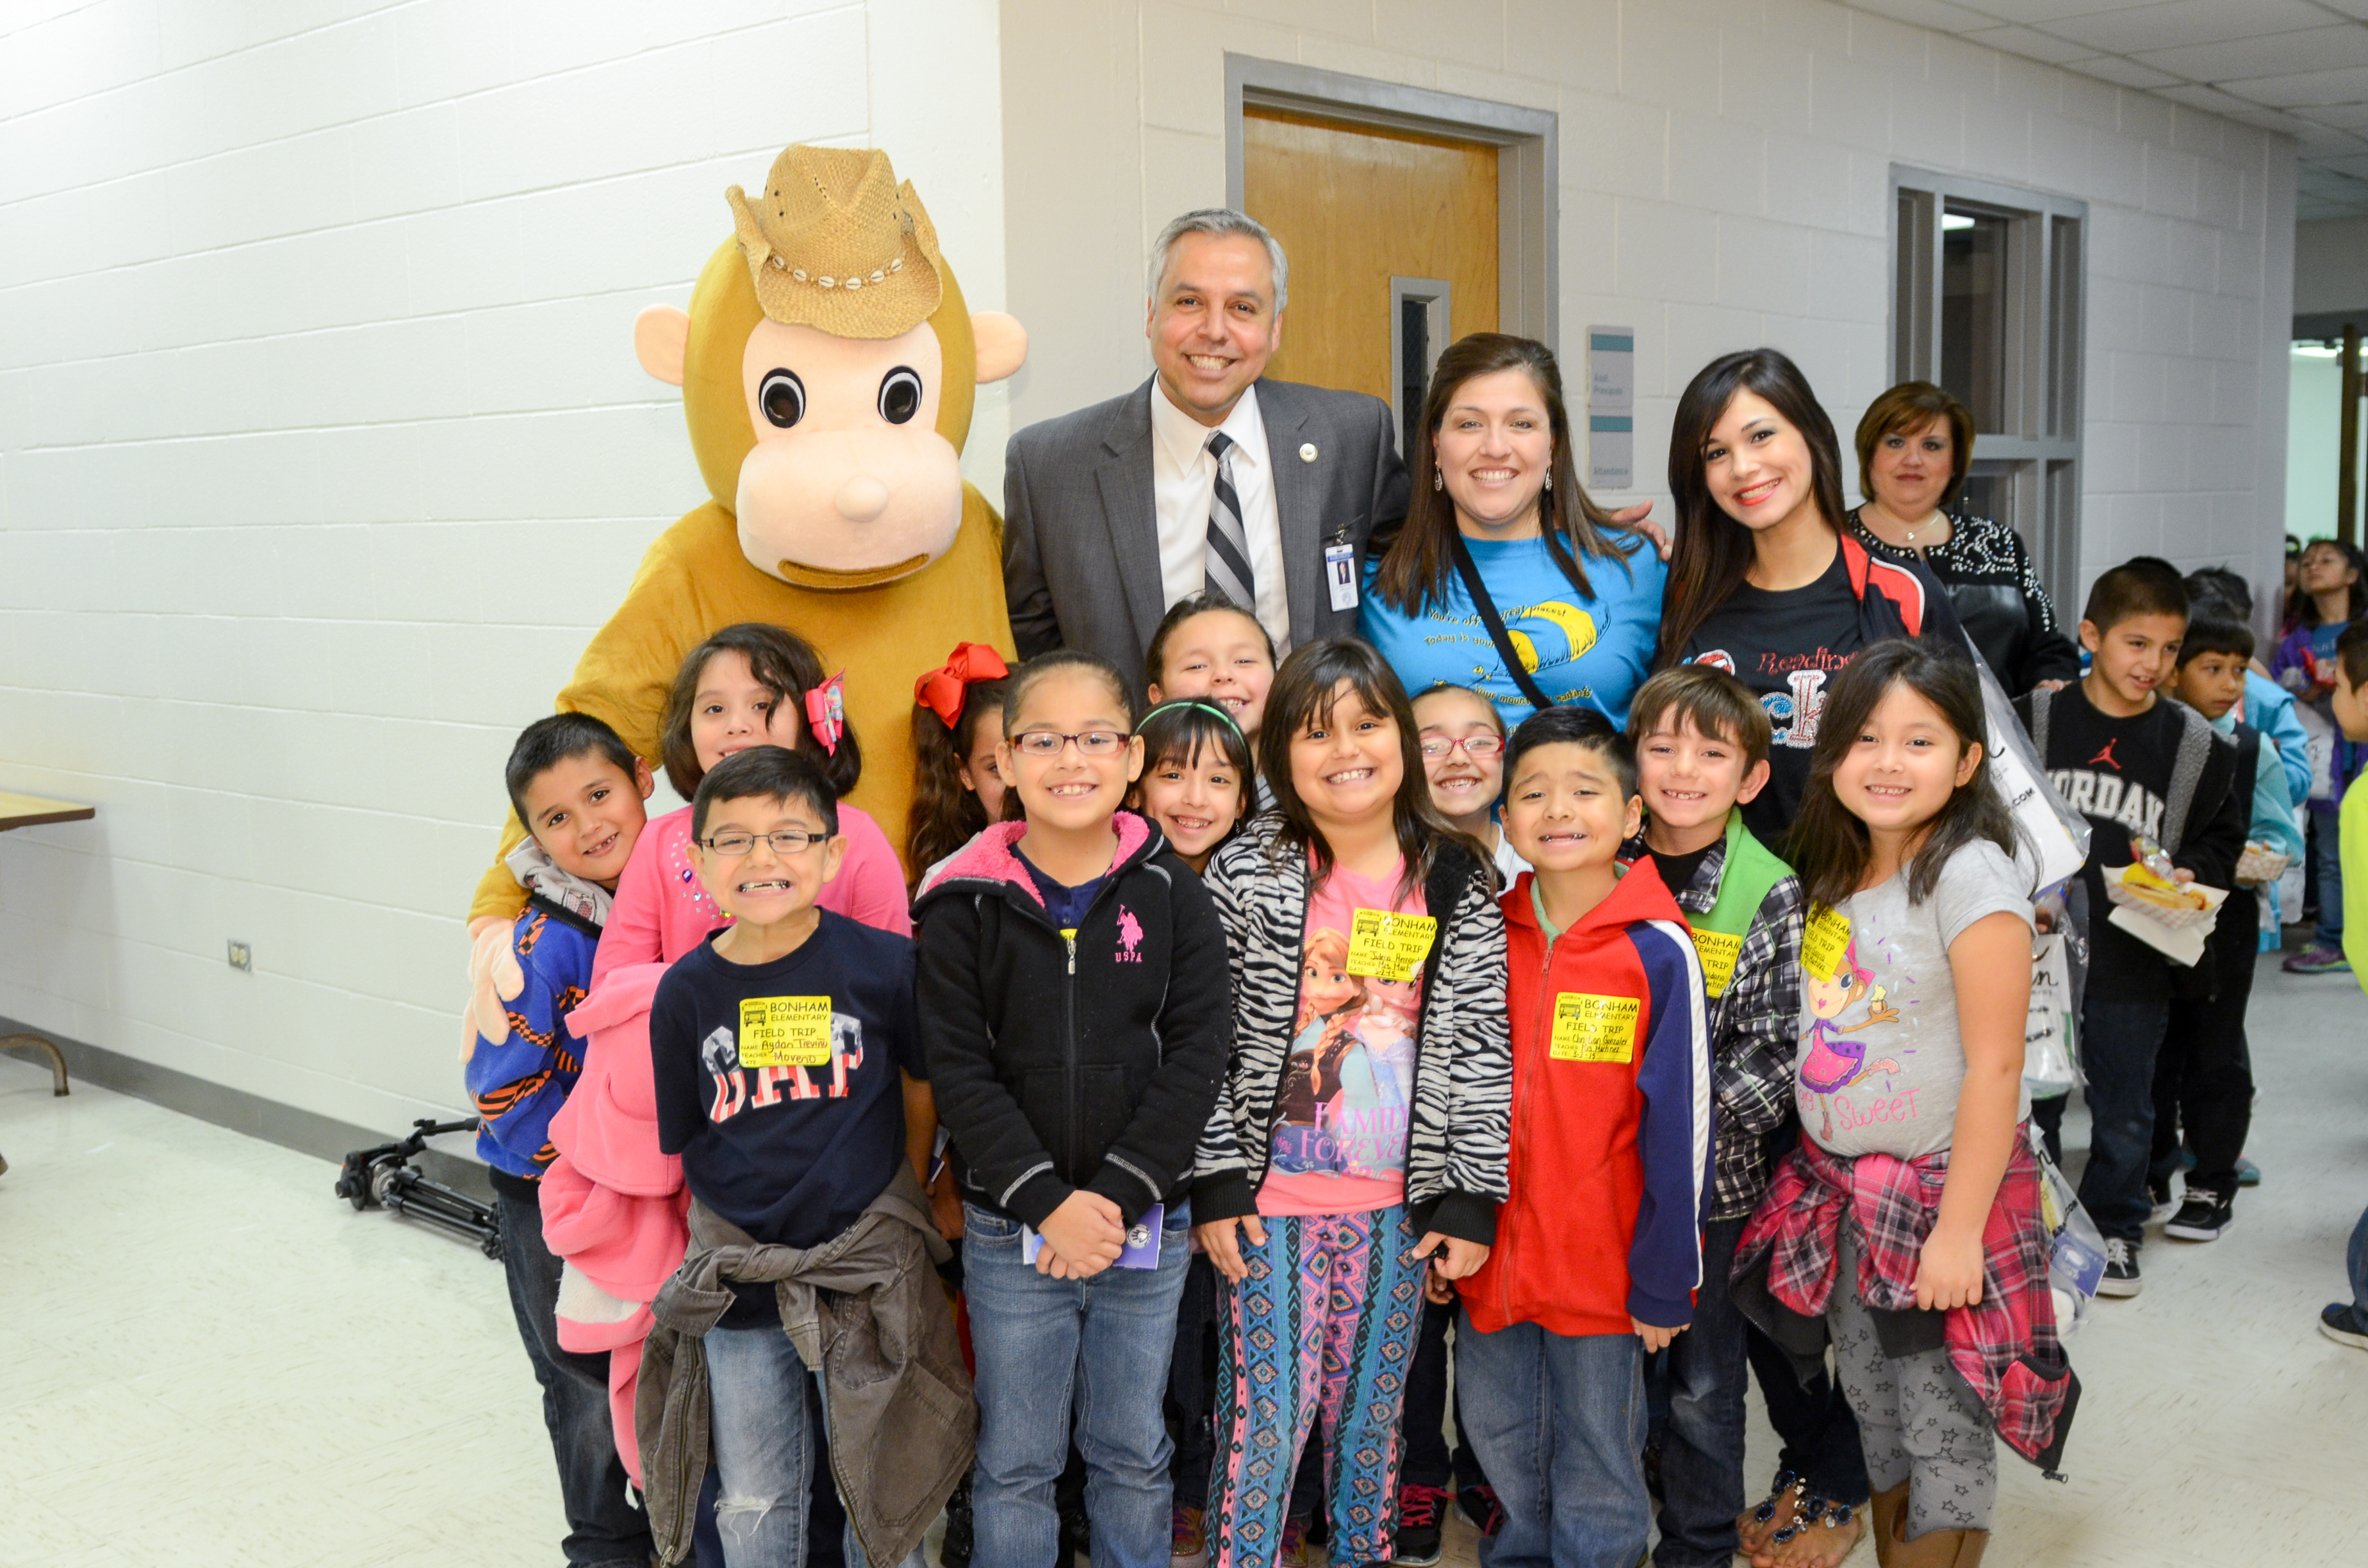 HCISD and Sylvan Learning Centers of the RGV team up in celebration of National Read Across America Day